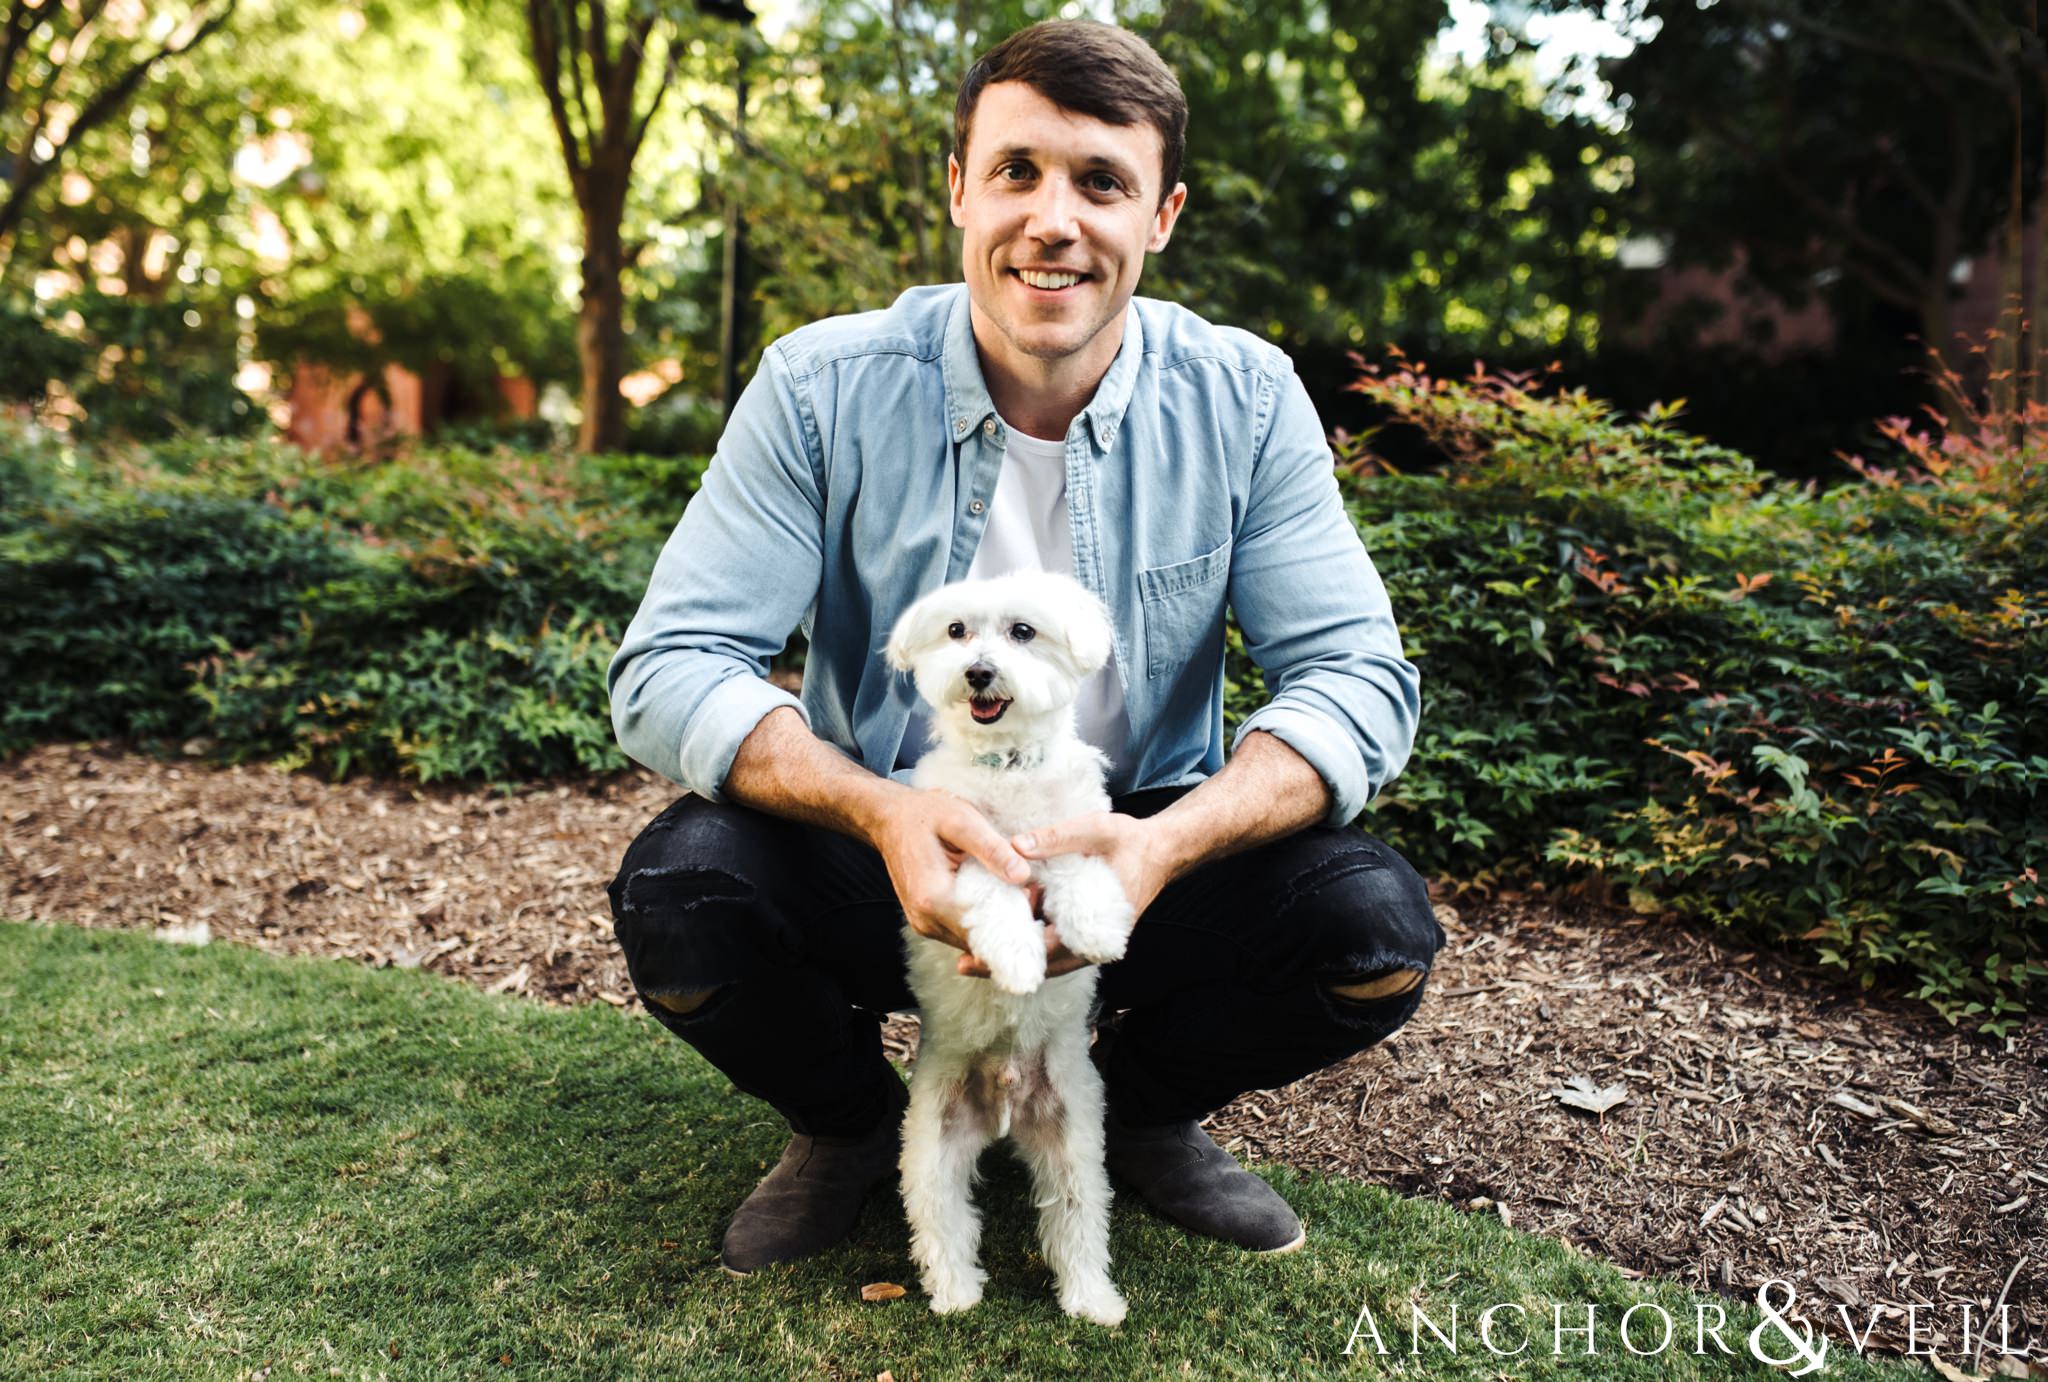 holding the dog during the uptown Charlotte engagement session